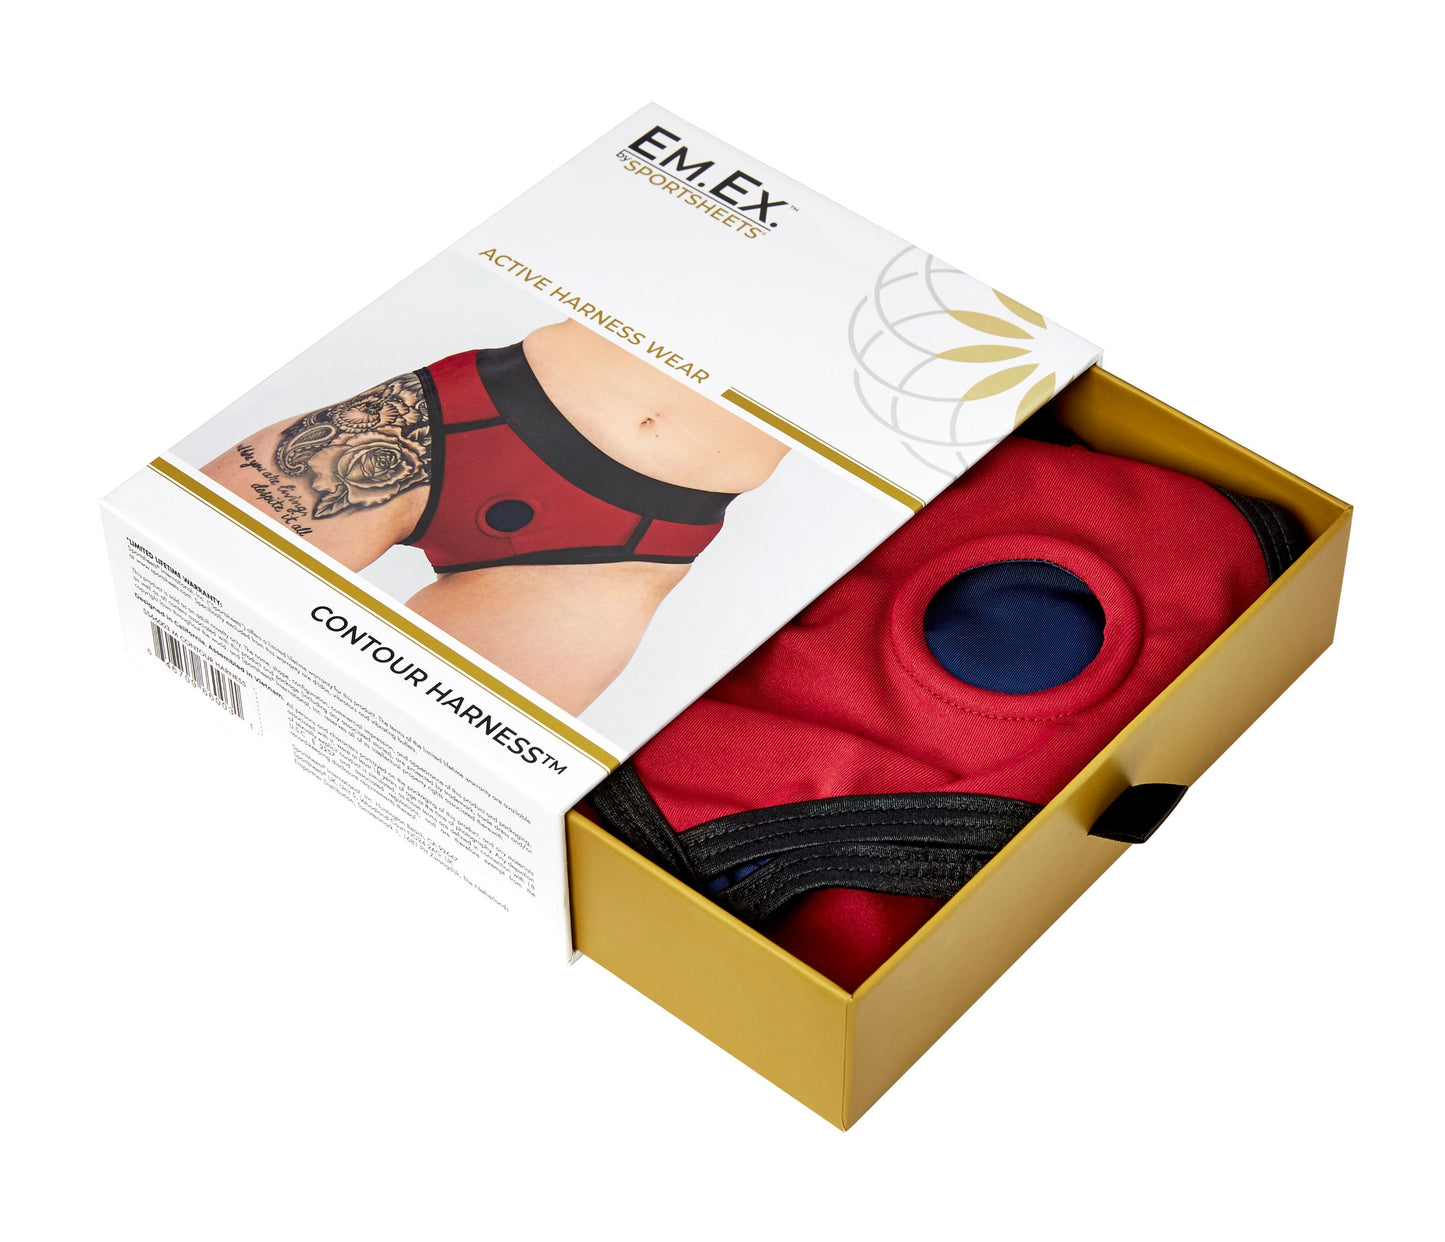 Photo of the open box showing how the harness briefs come folded nicely inside (red).